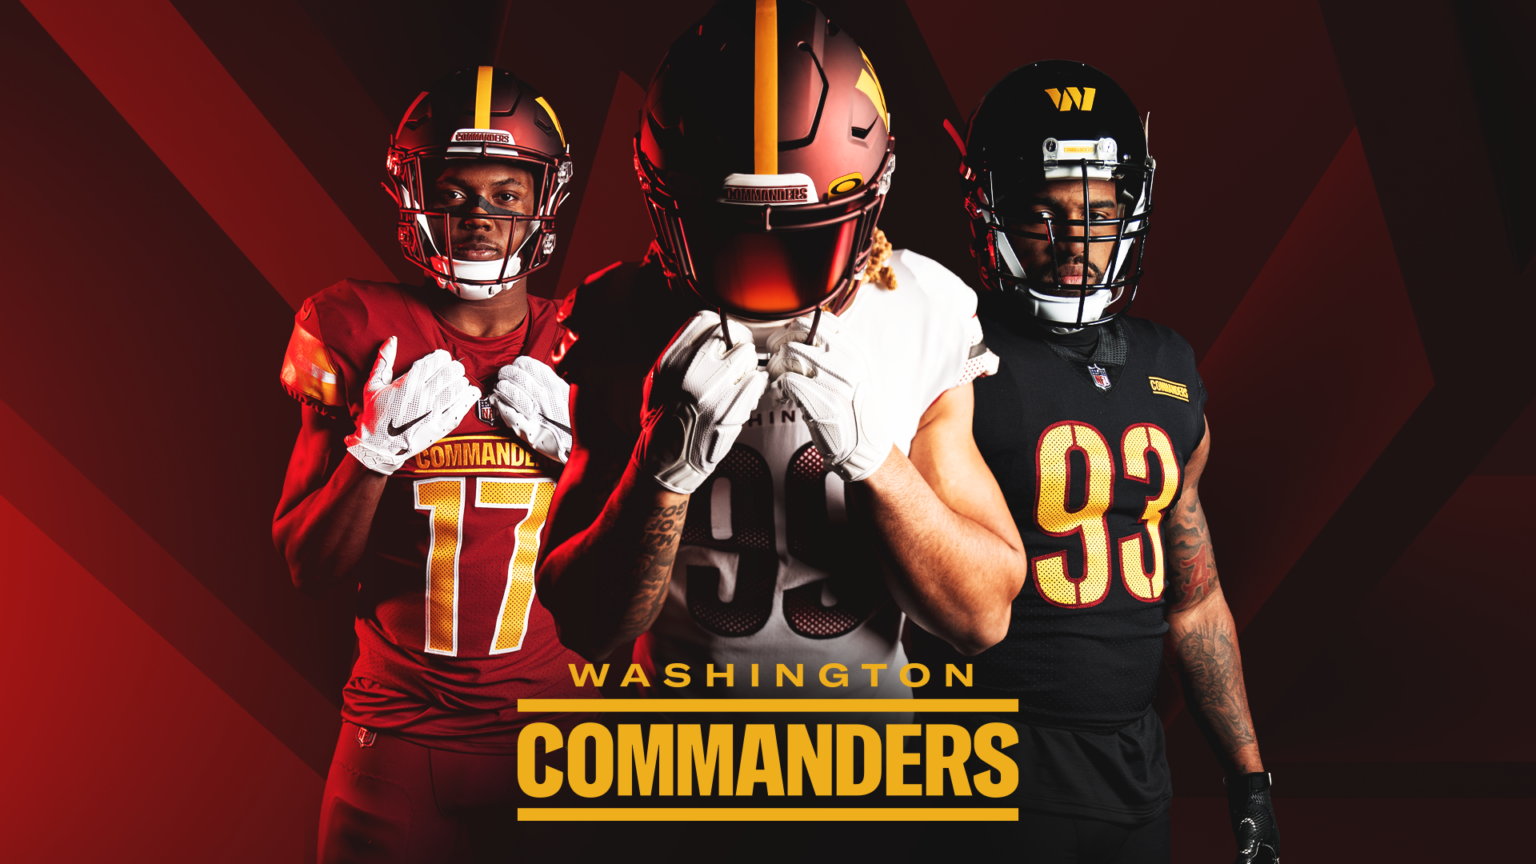 Five Things to Know About the Washington Commanders as They Kick off